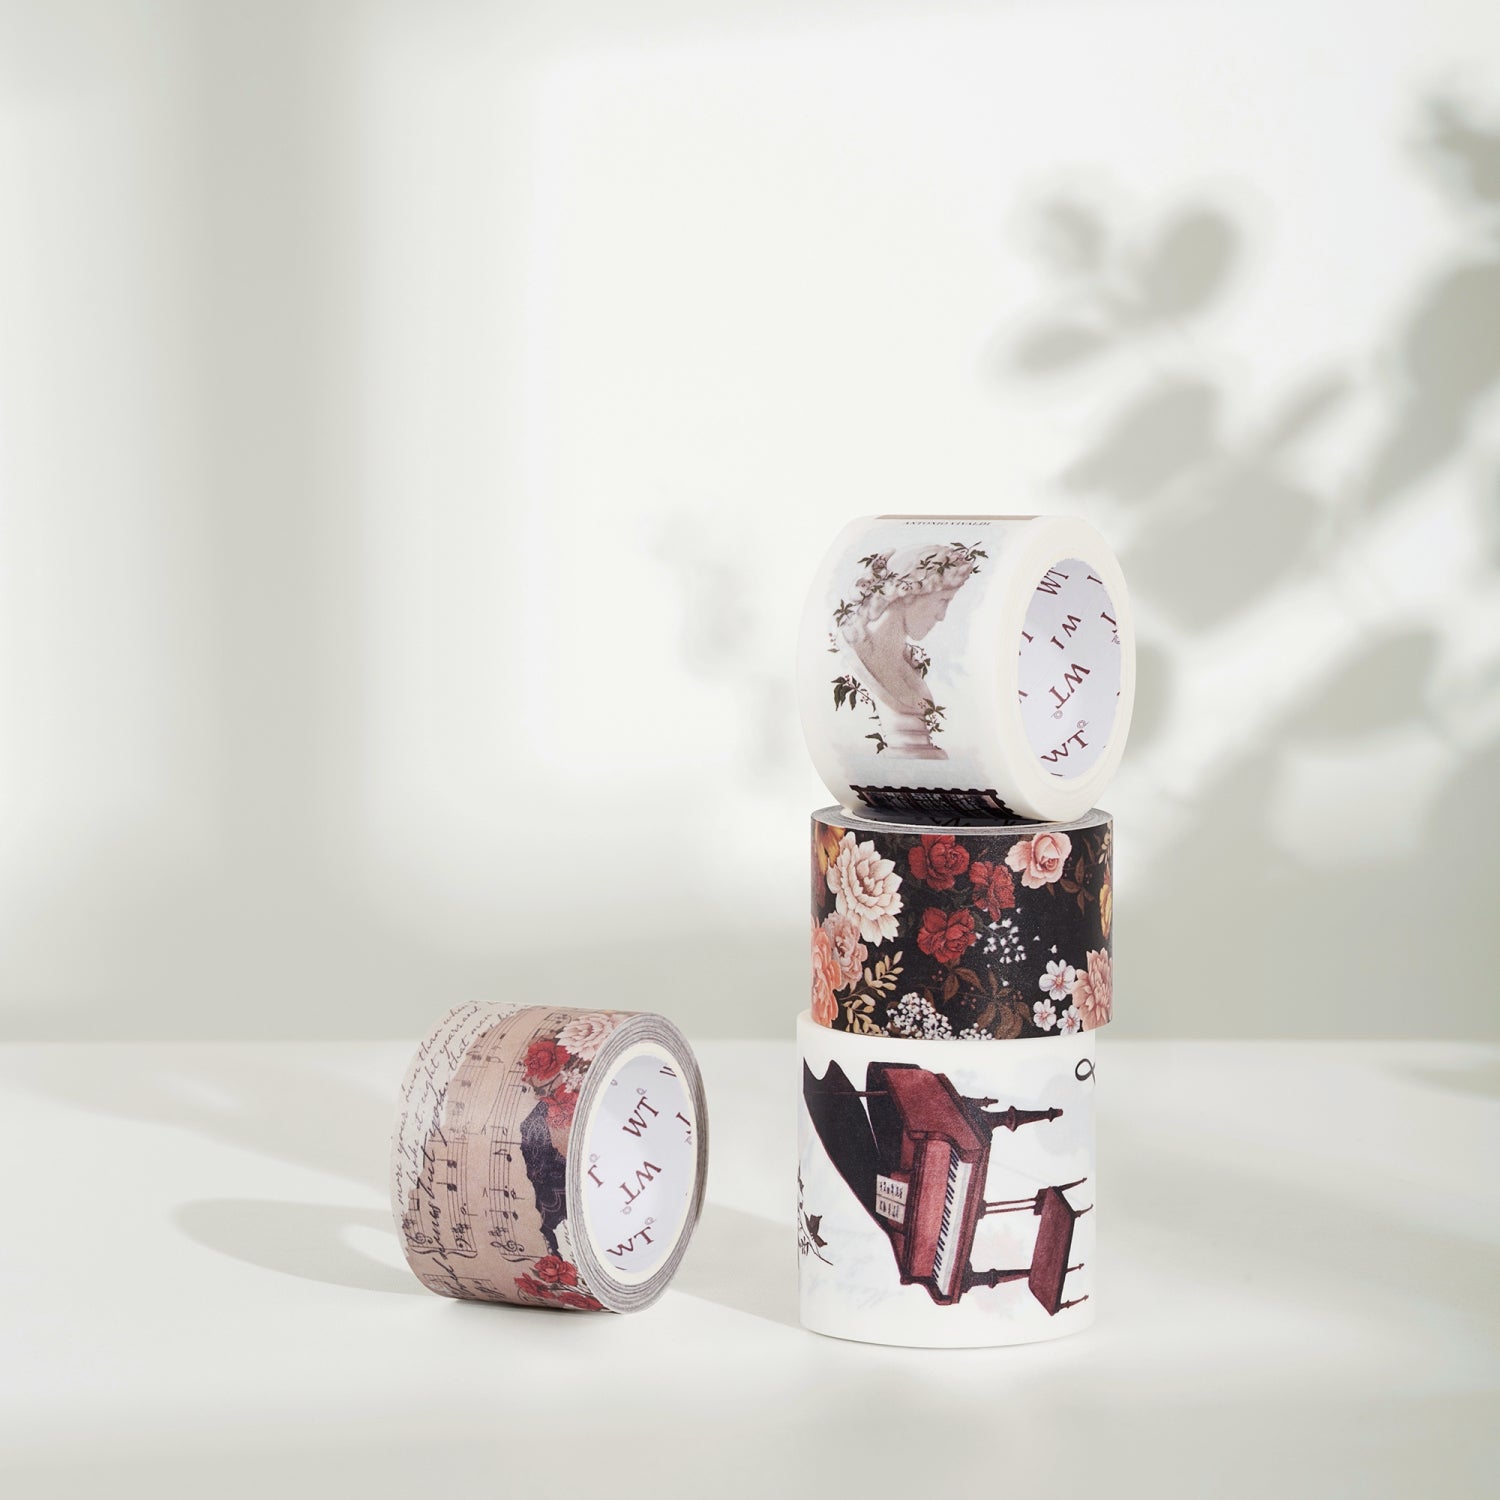 Flowers of Teyvat Genshin Impact Stationery Collection Washi Tape